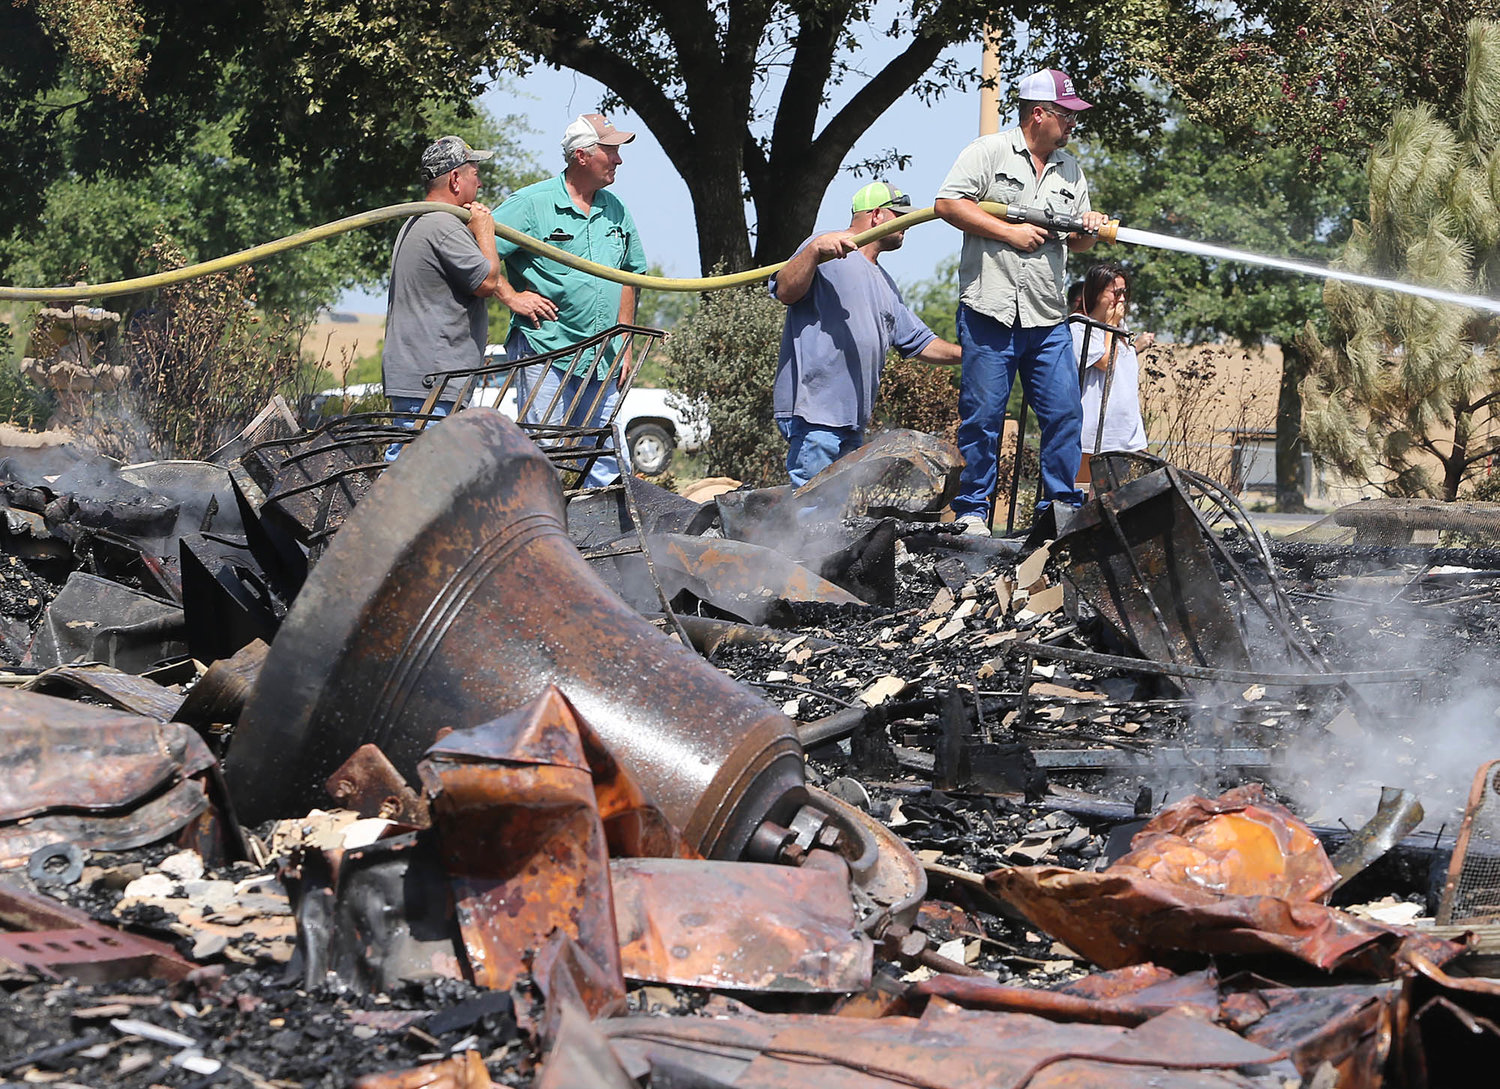 Volunteer firefighters extinguish hot spots July 29, 2019, after fire destroyed the Church of the Visitation in Westphalia, Texas. Since 1883 the parish has served the Catholic community of southwestern Falls County, many of whom are descendents of immigrants from the northwest German region of Westphalia.